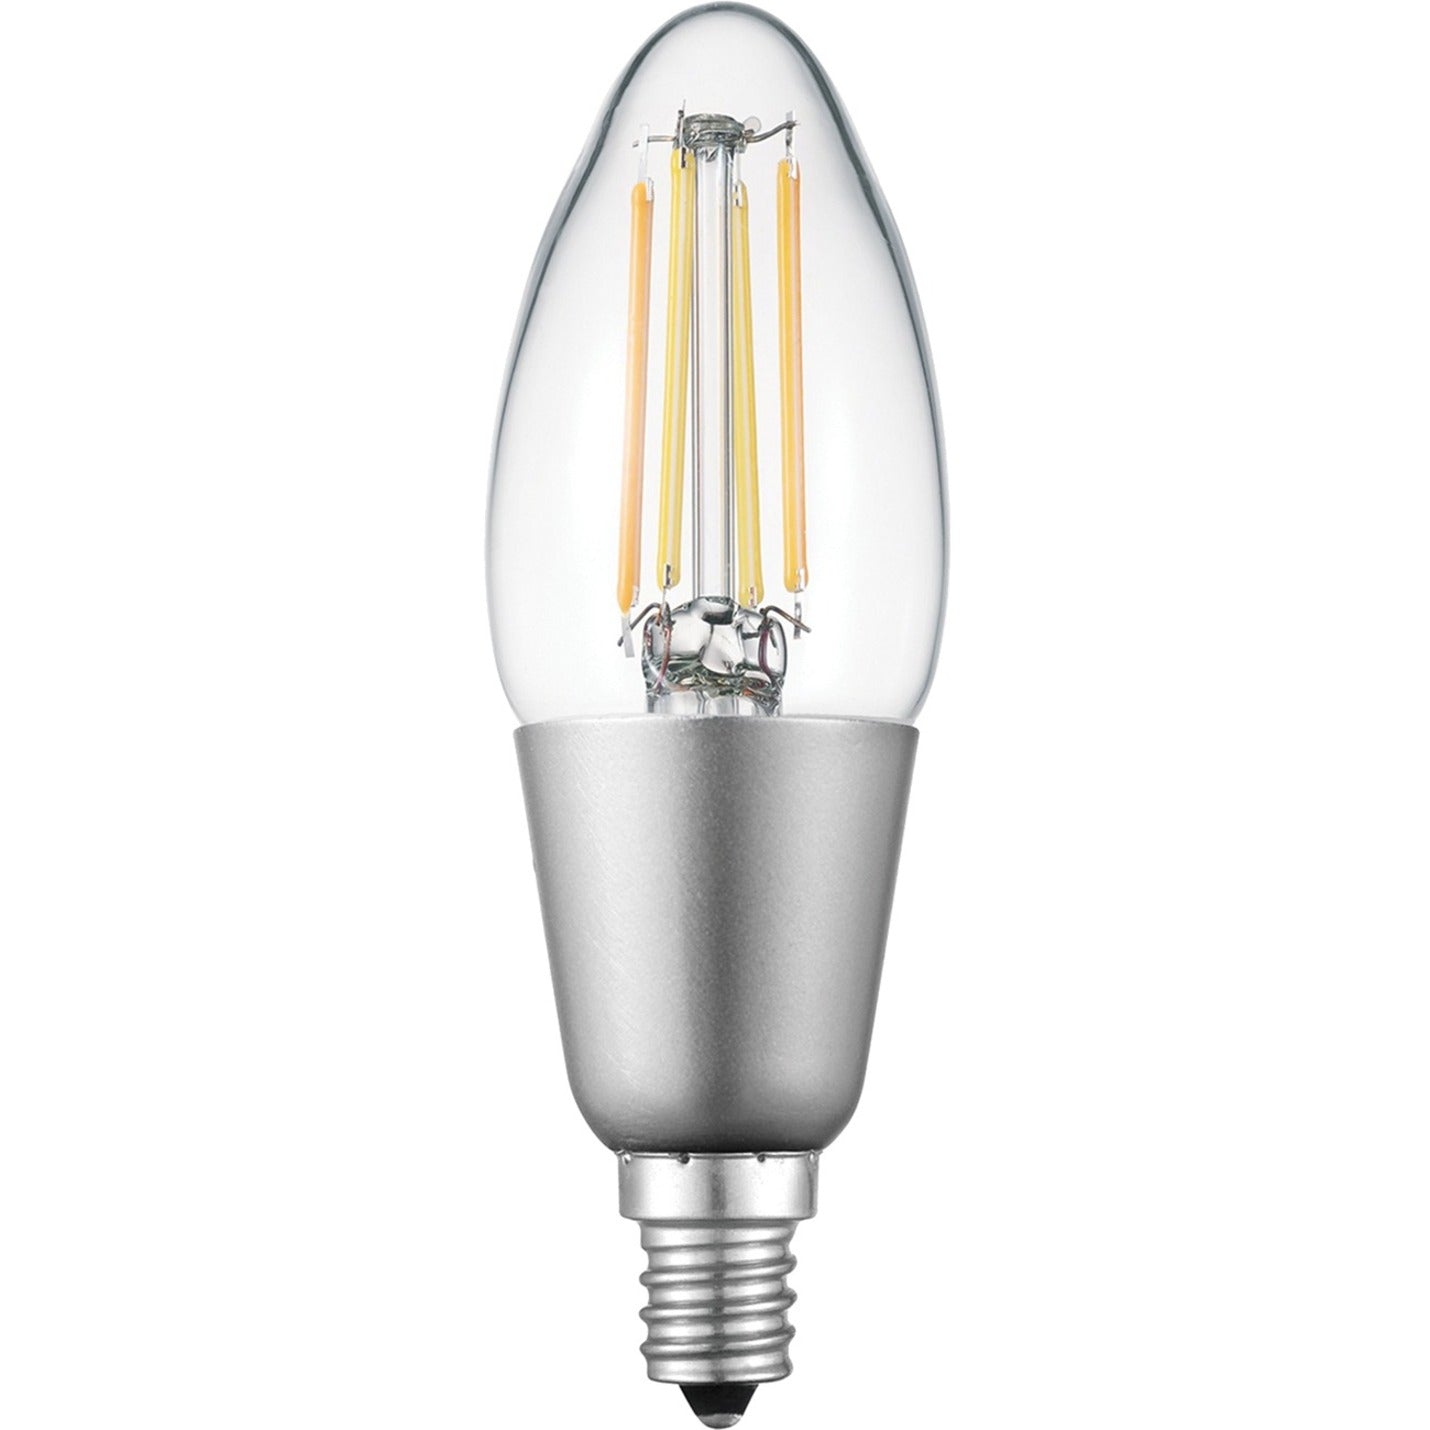 Globe Electric 34918 LED Light Bulb, Dimmable, Adjustable Light Color, Wi-Fi, Voice Control, Energy Star, 3 Year Warranty